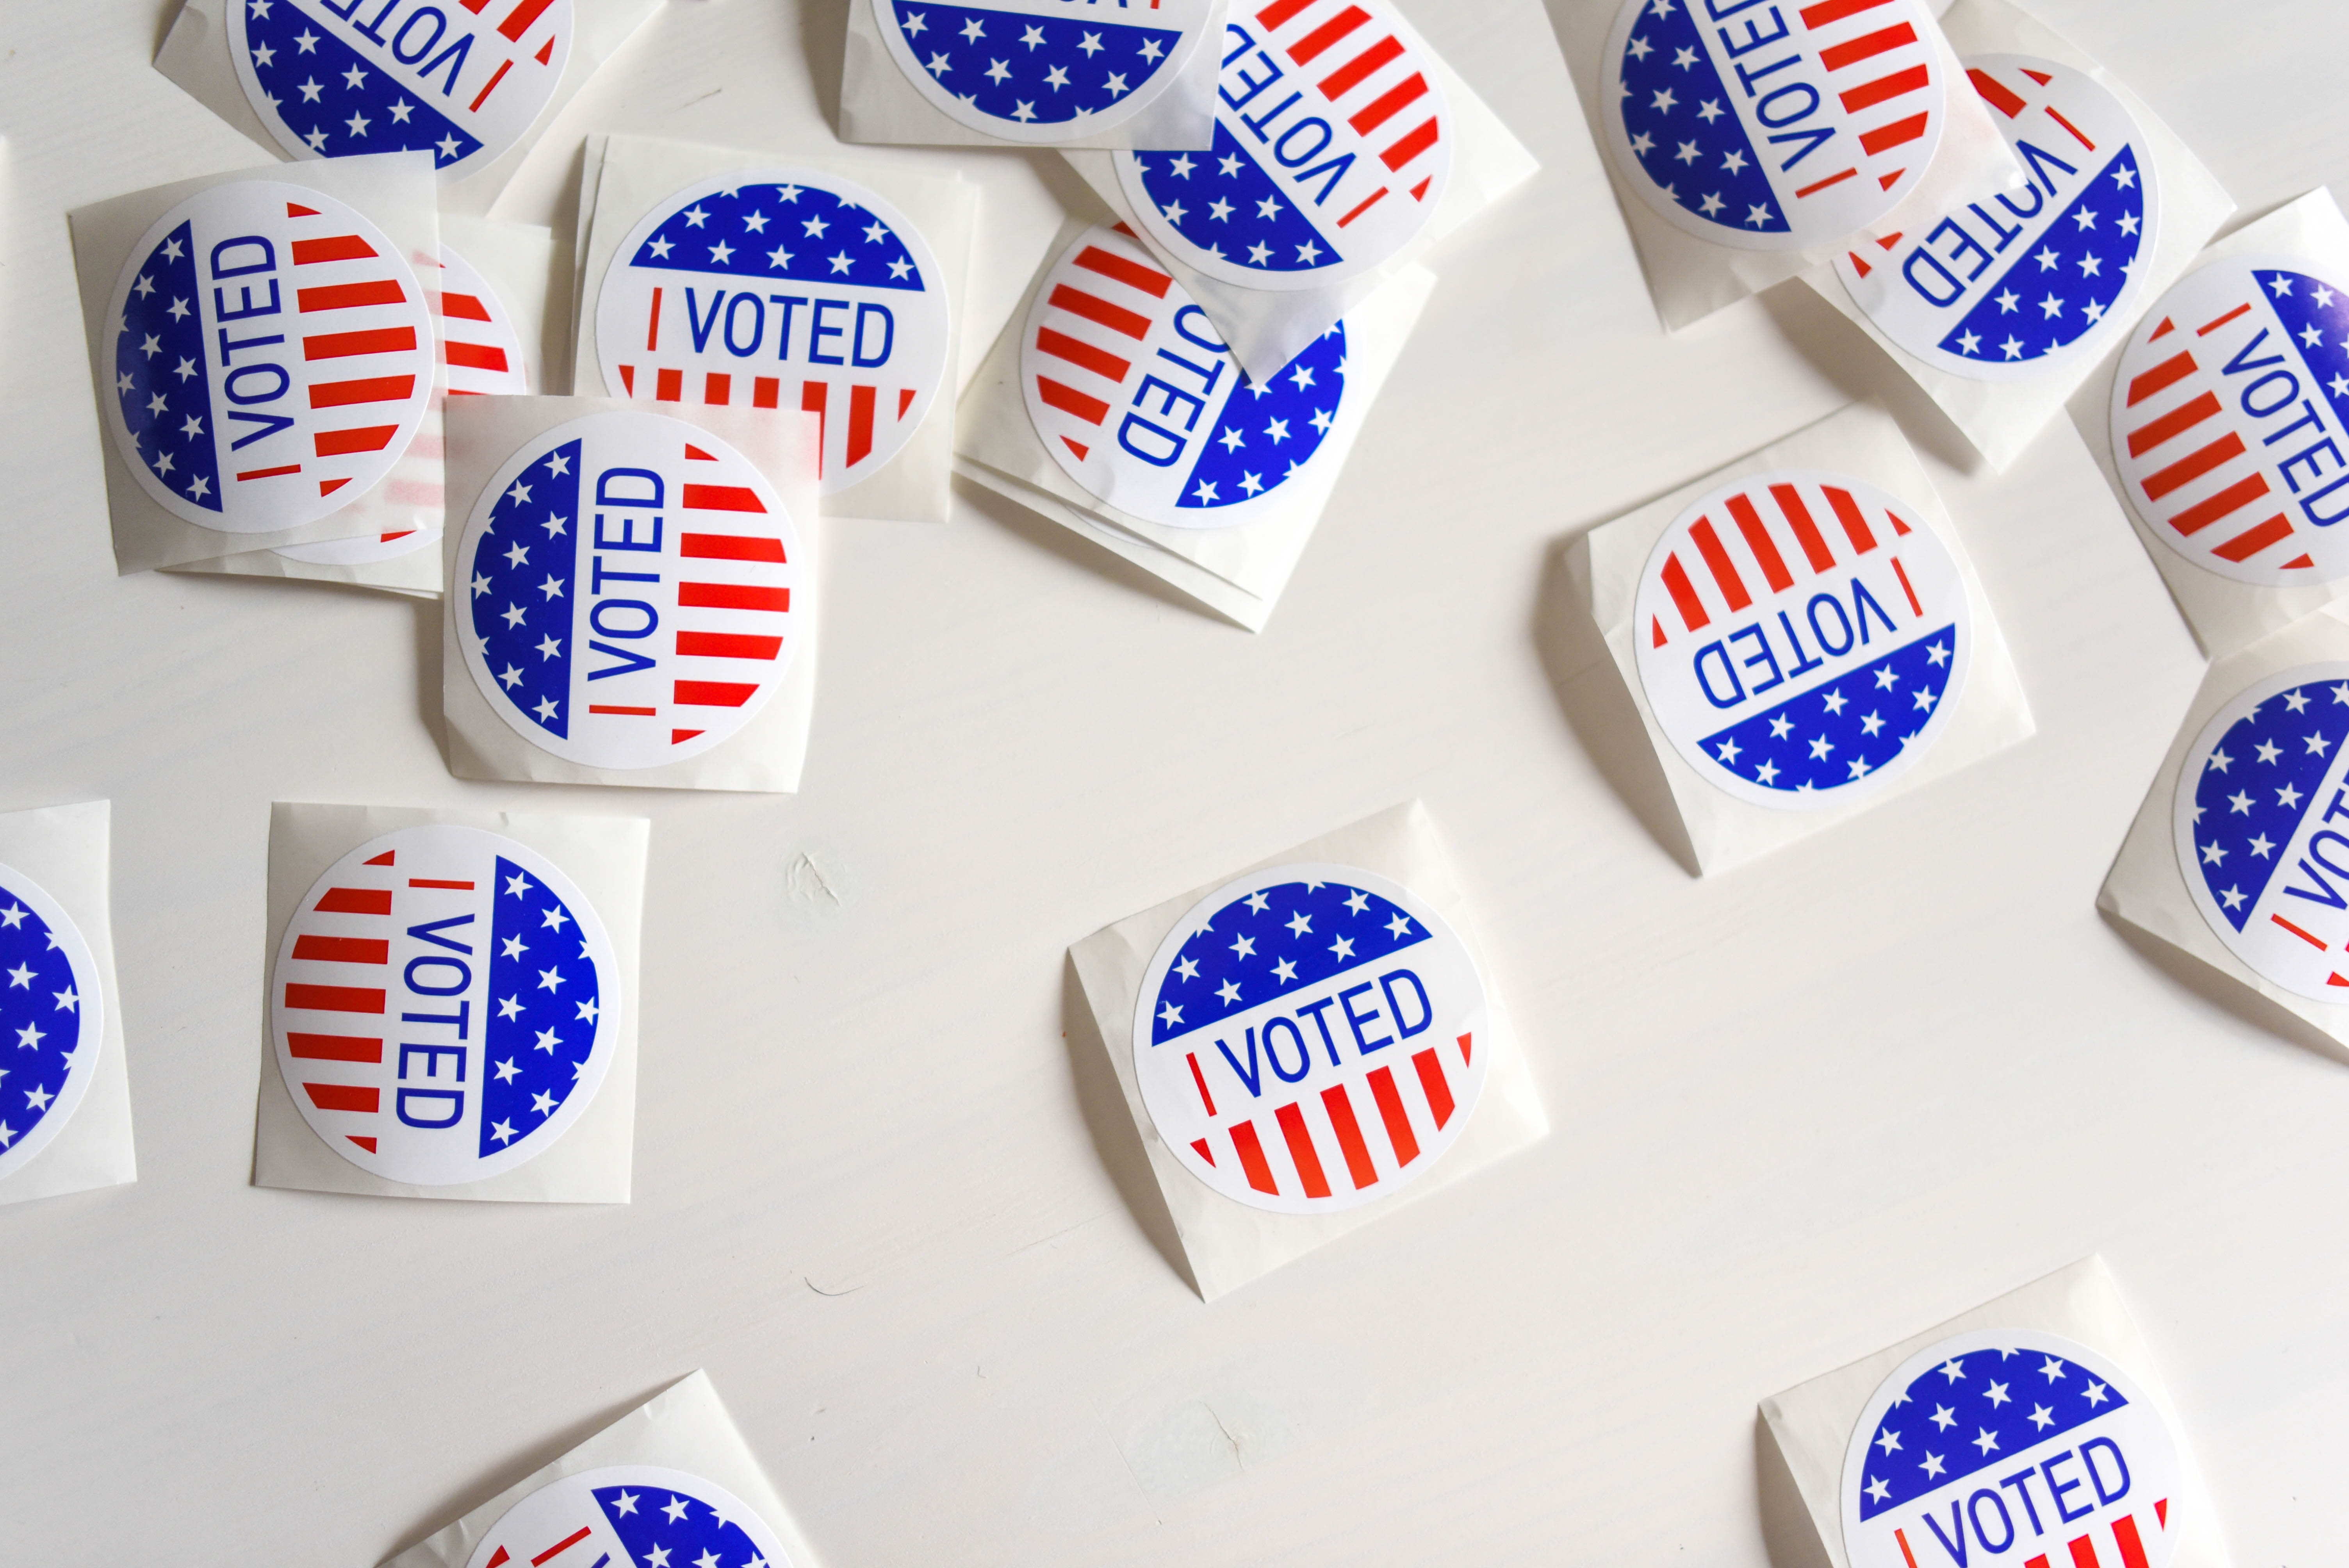 Photo of I Voted stickers by Element5 Digital on Unsplash